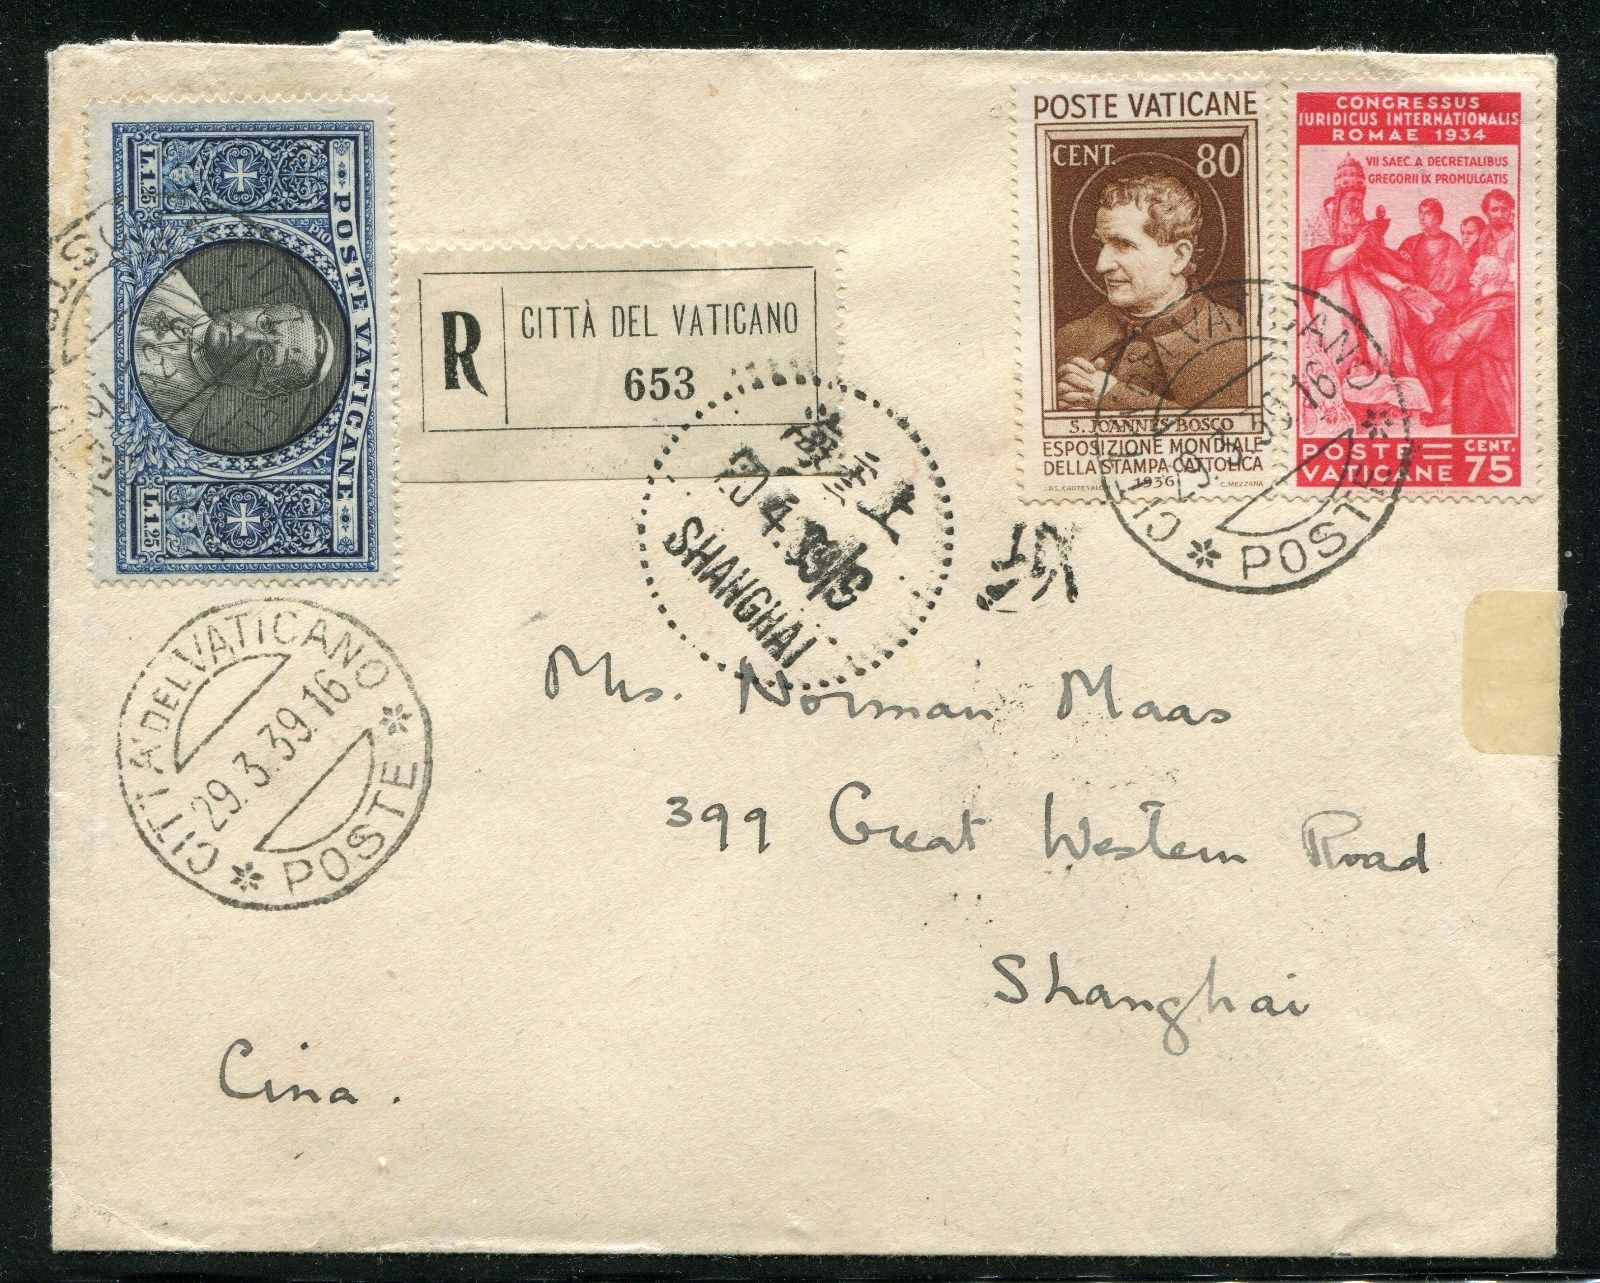 VATICAN CITY 1939 Registered Cover to Shanghai China